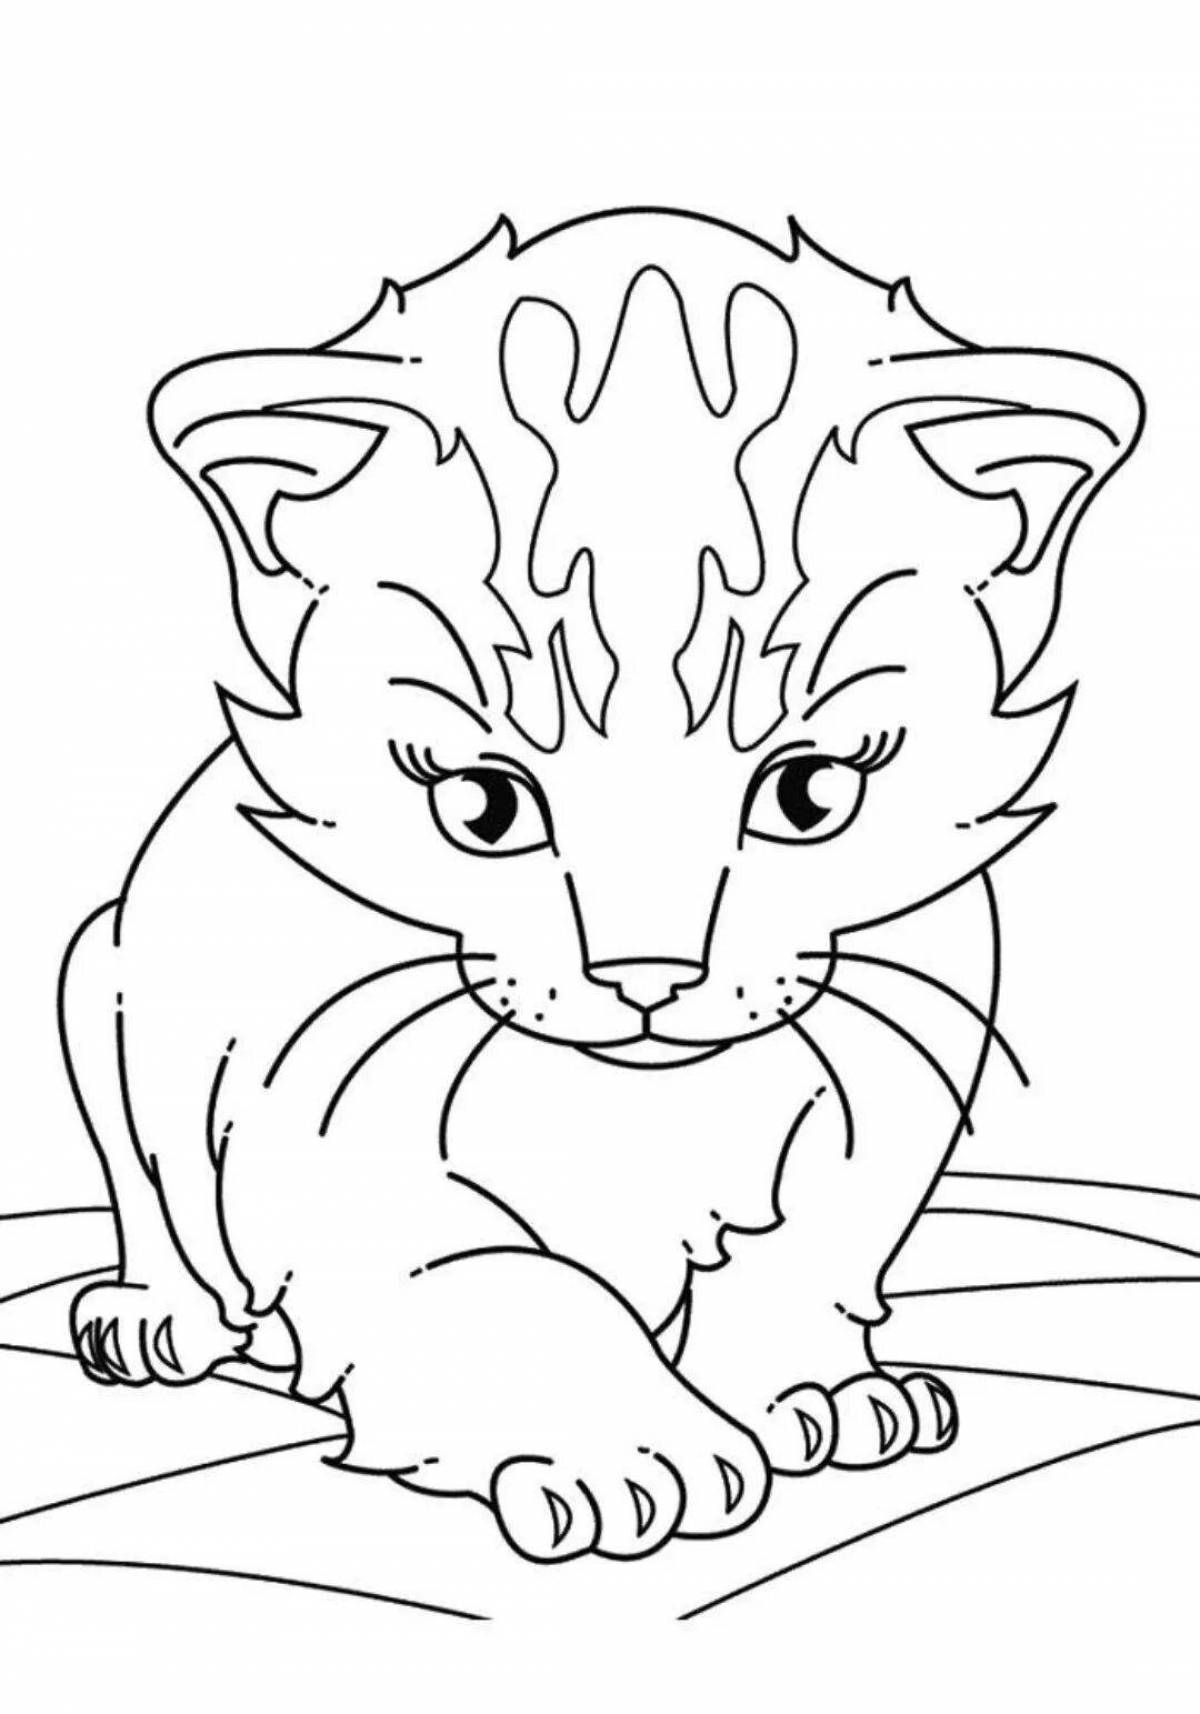 Colorful animal coloring pages for children 10-12 years old